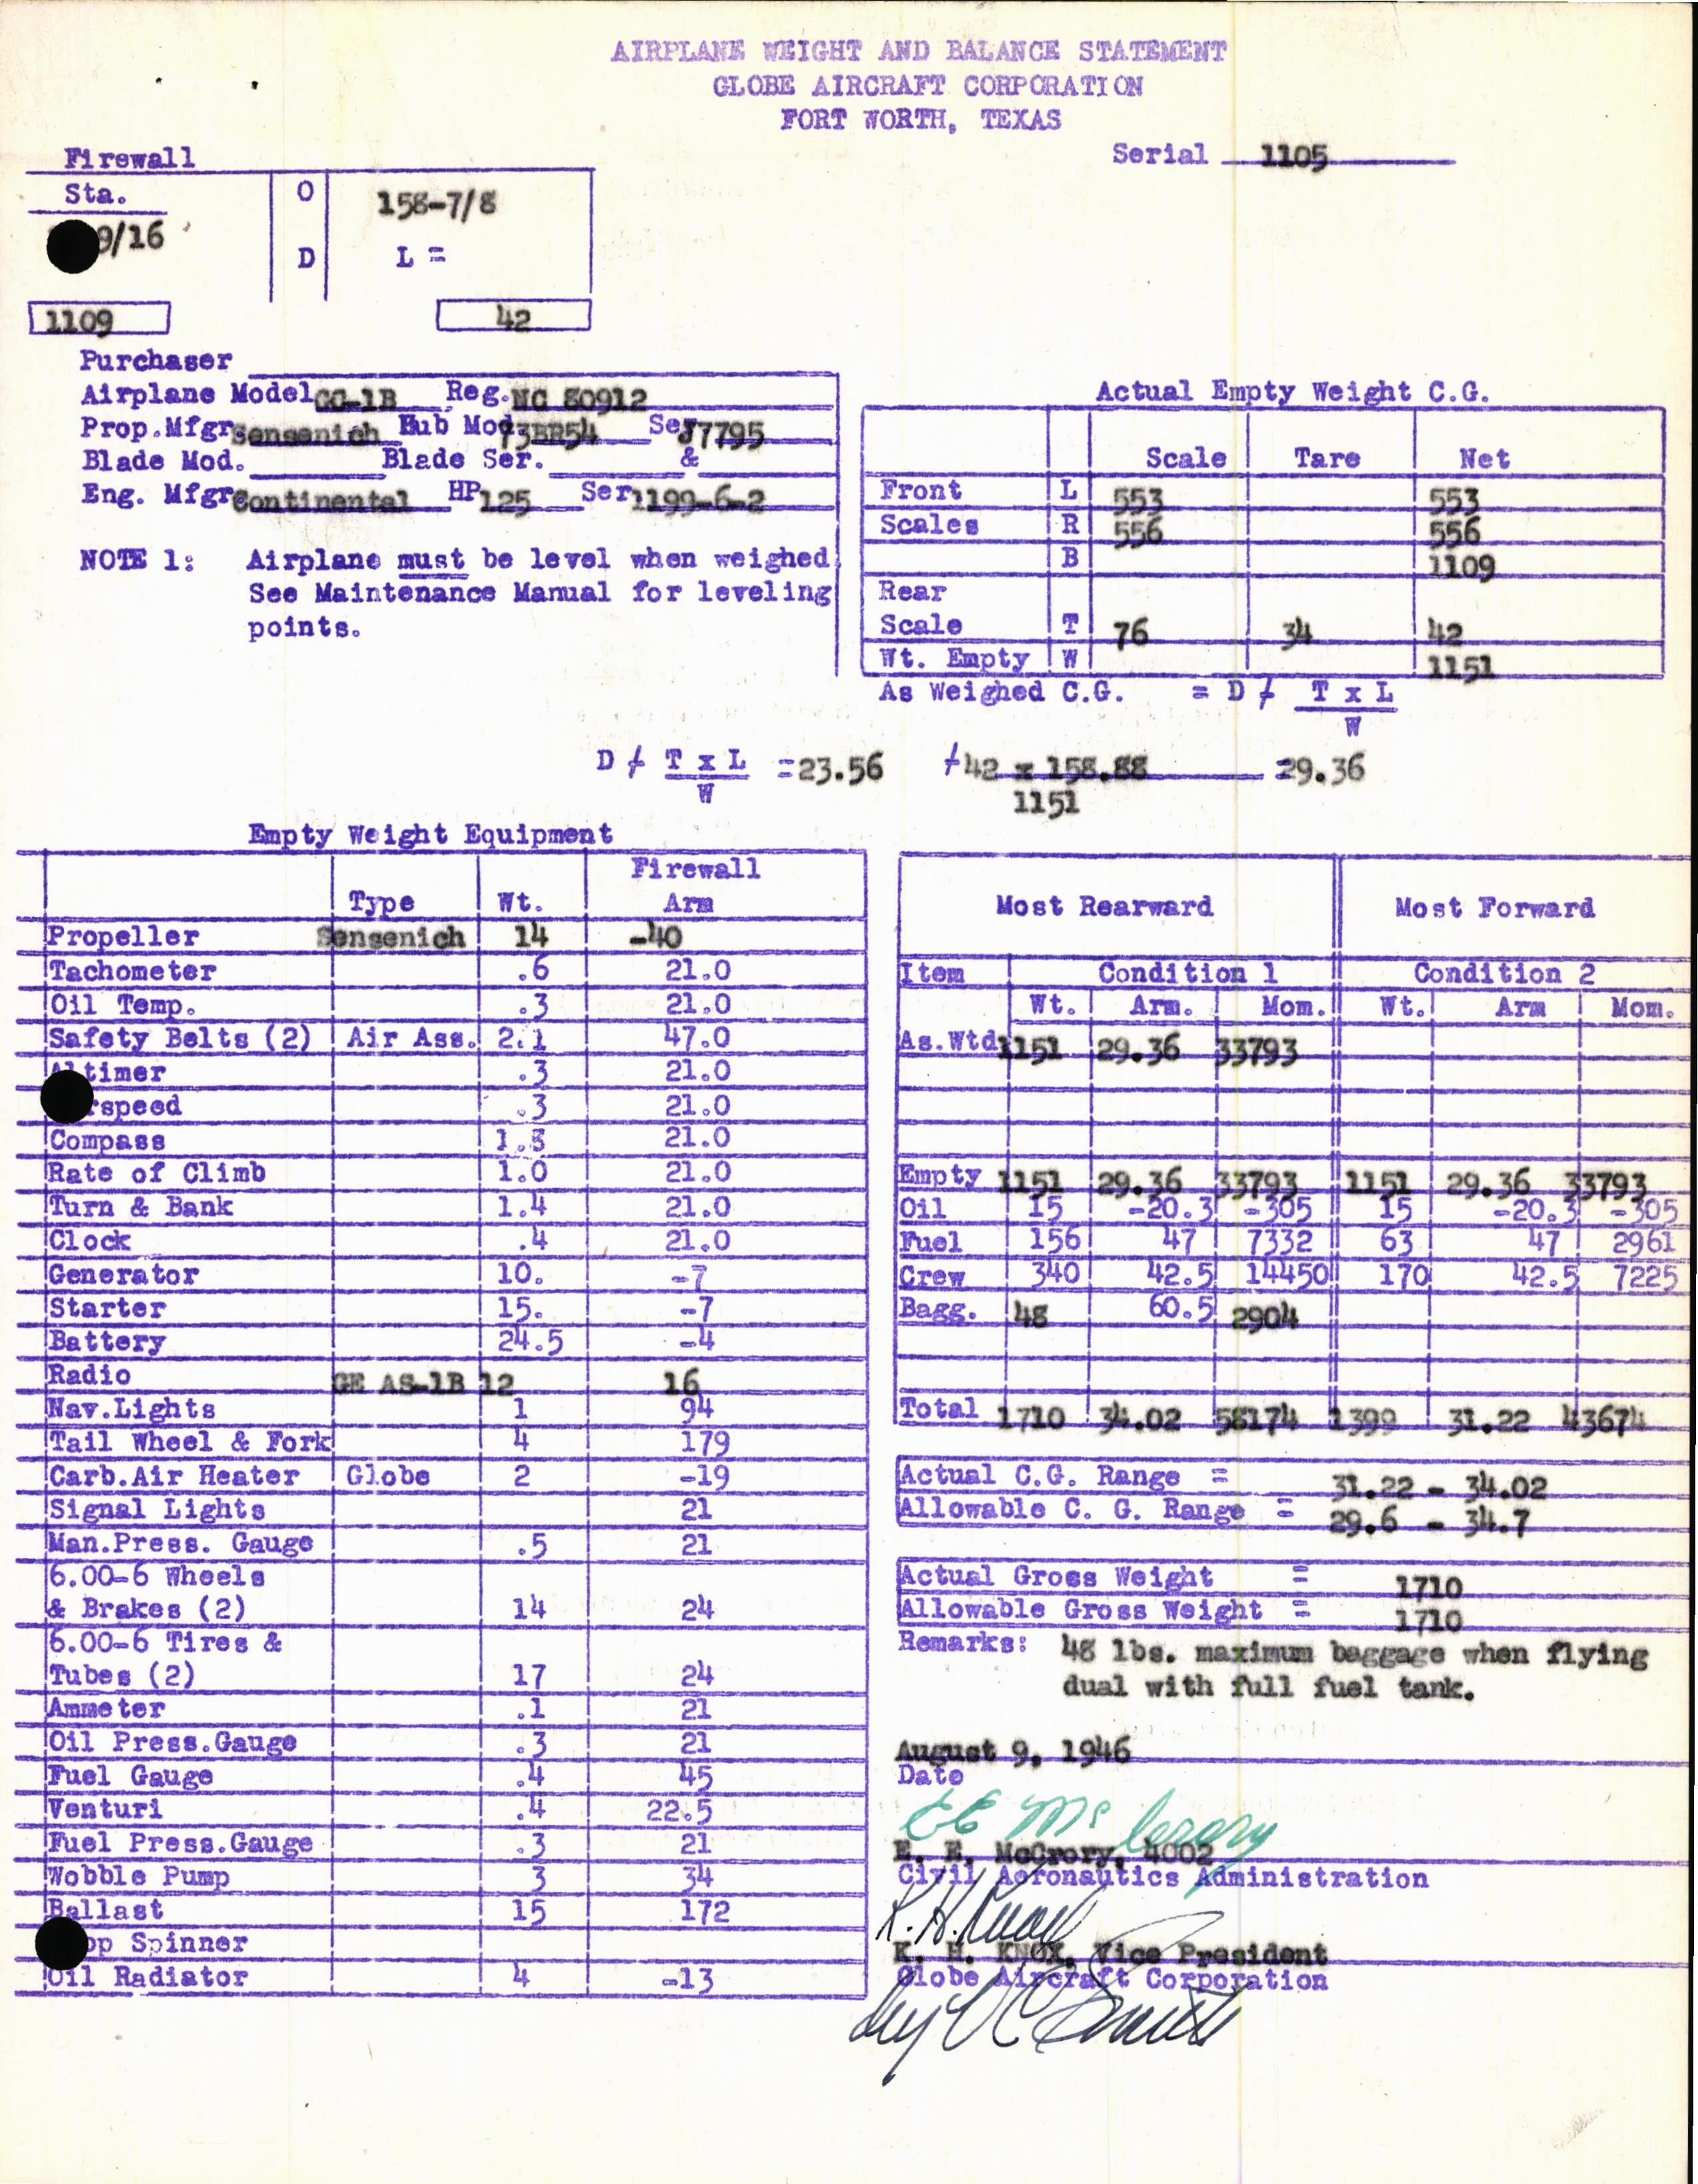 Sample page 5 from AirCorps Library document: Technical Information for Serial Number 1105